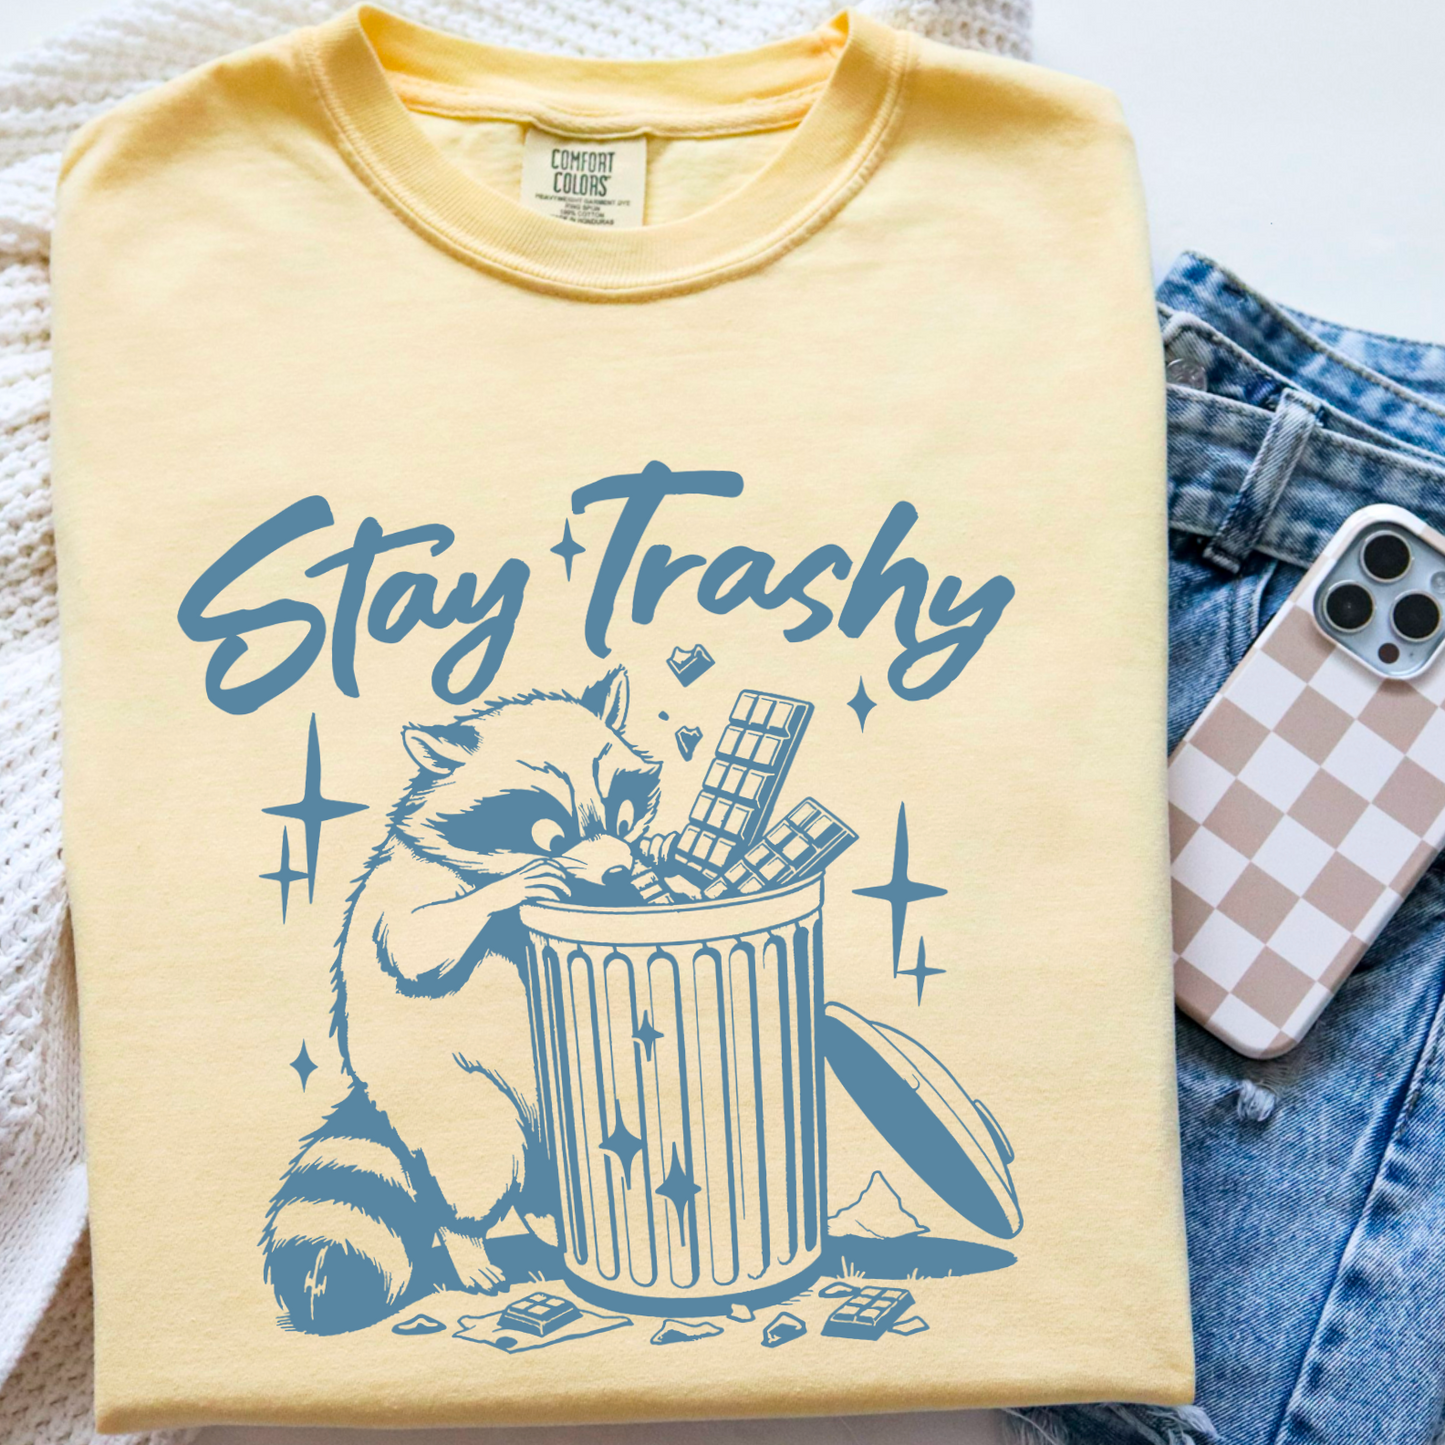 Stay Trashy Comfort Color Graphic Tee As Pictured Is Banana